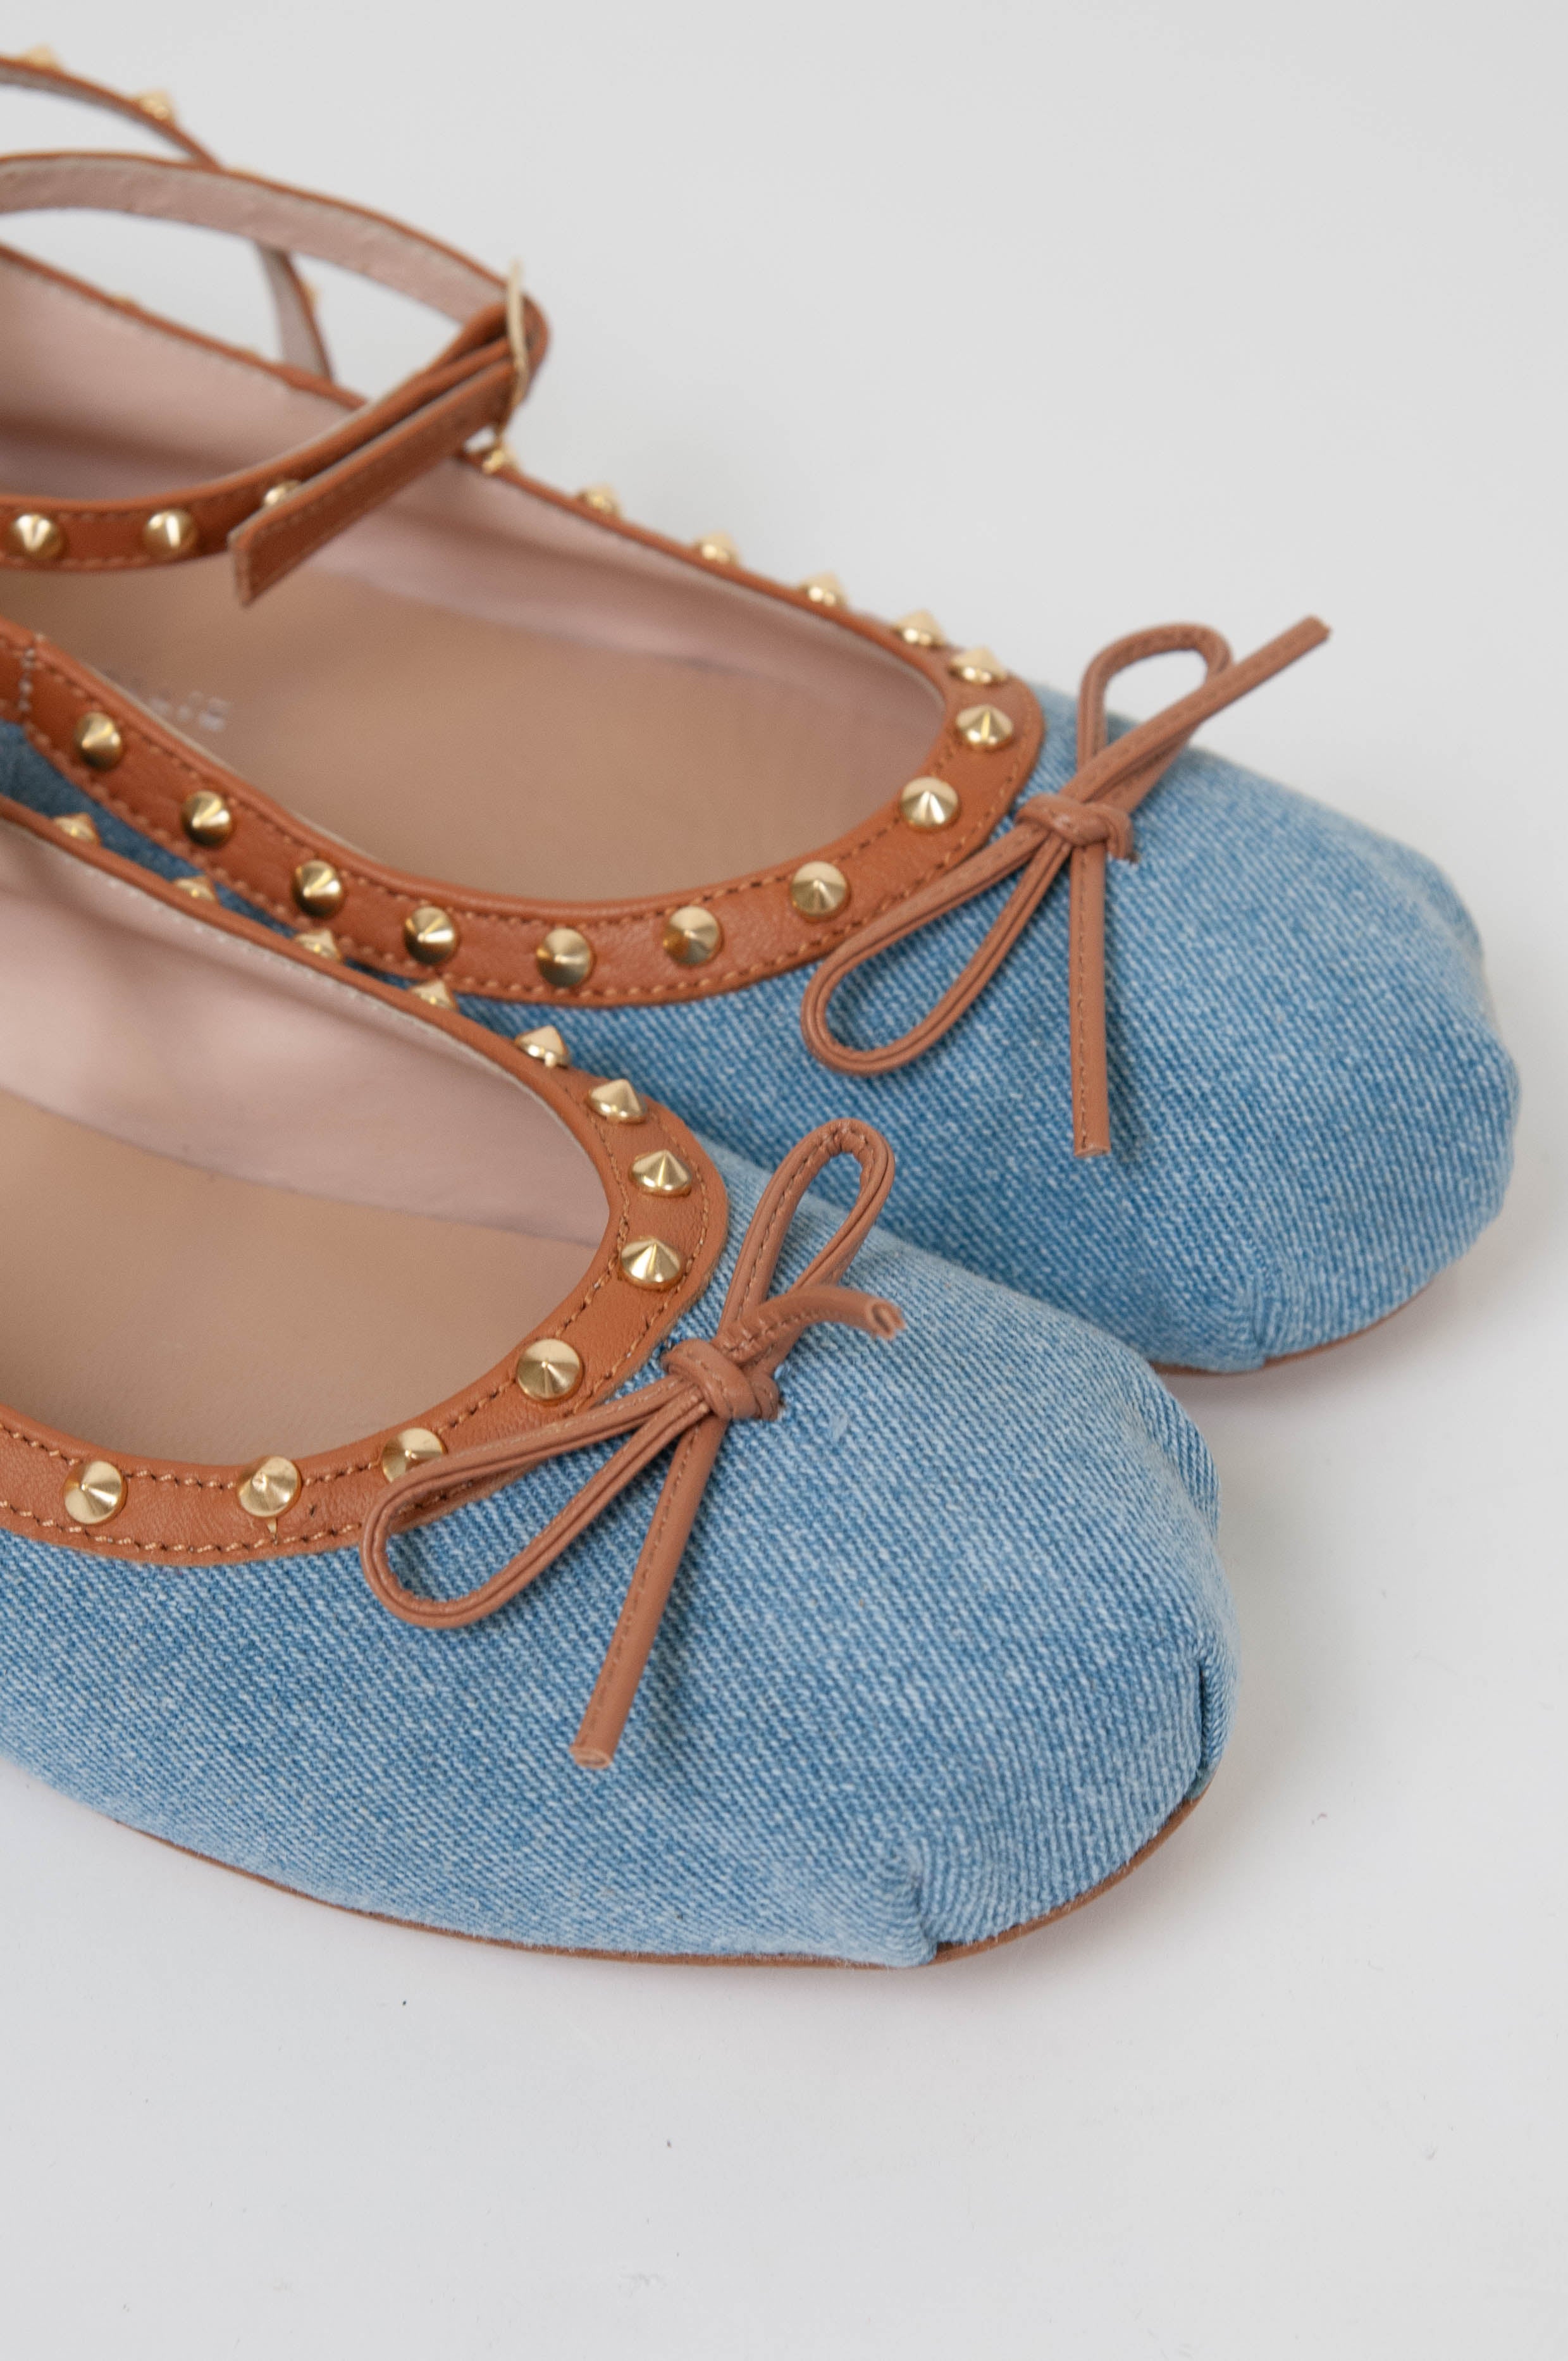 Divine Follie - Denim ballerina with leather profile with studs and strap